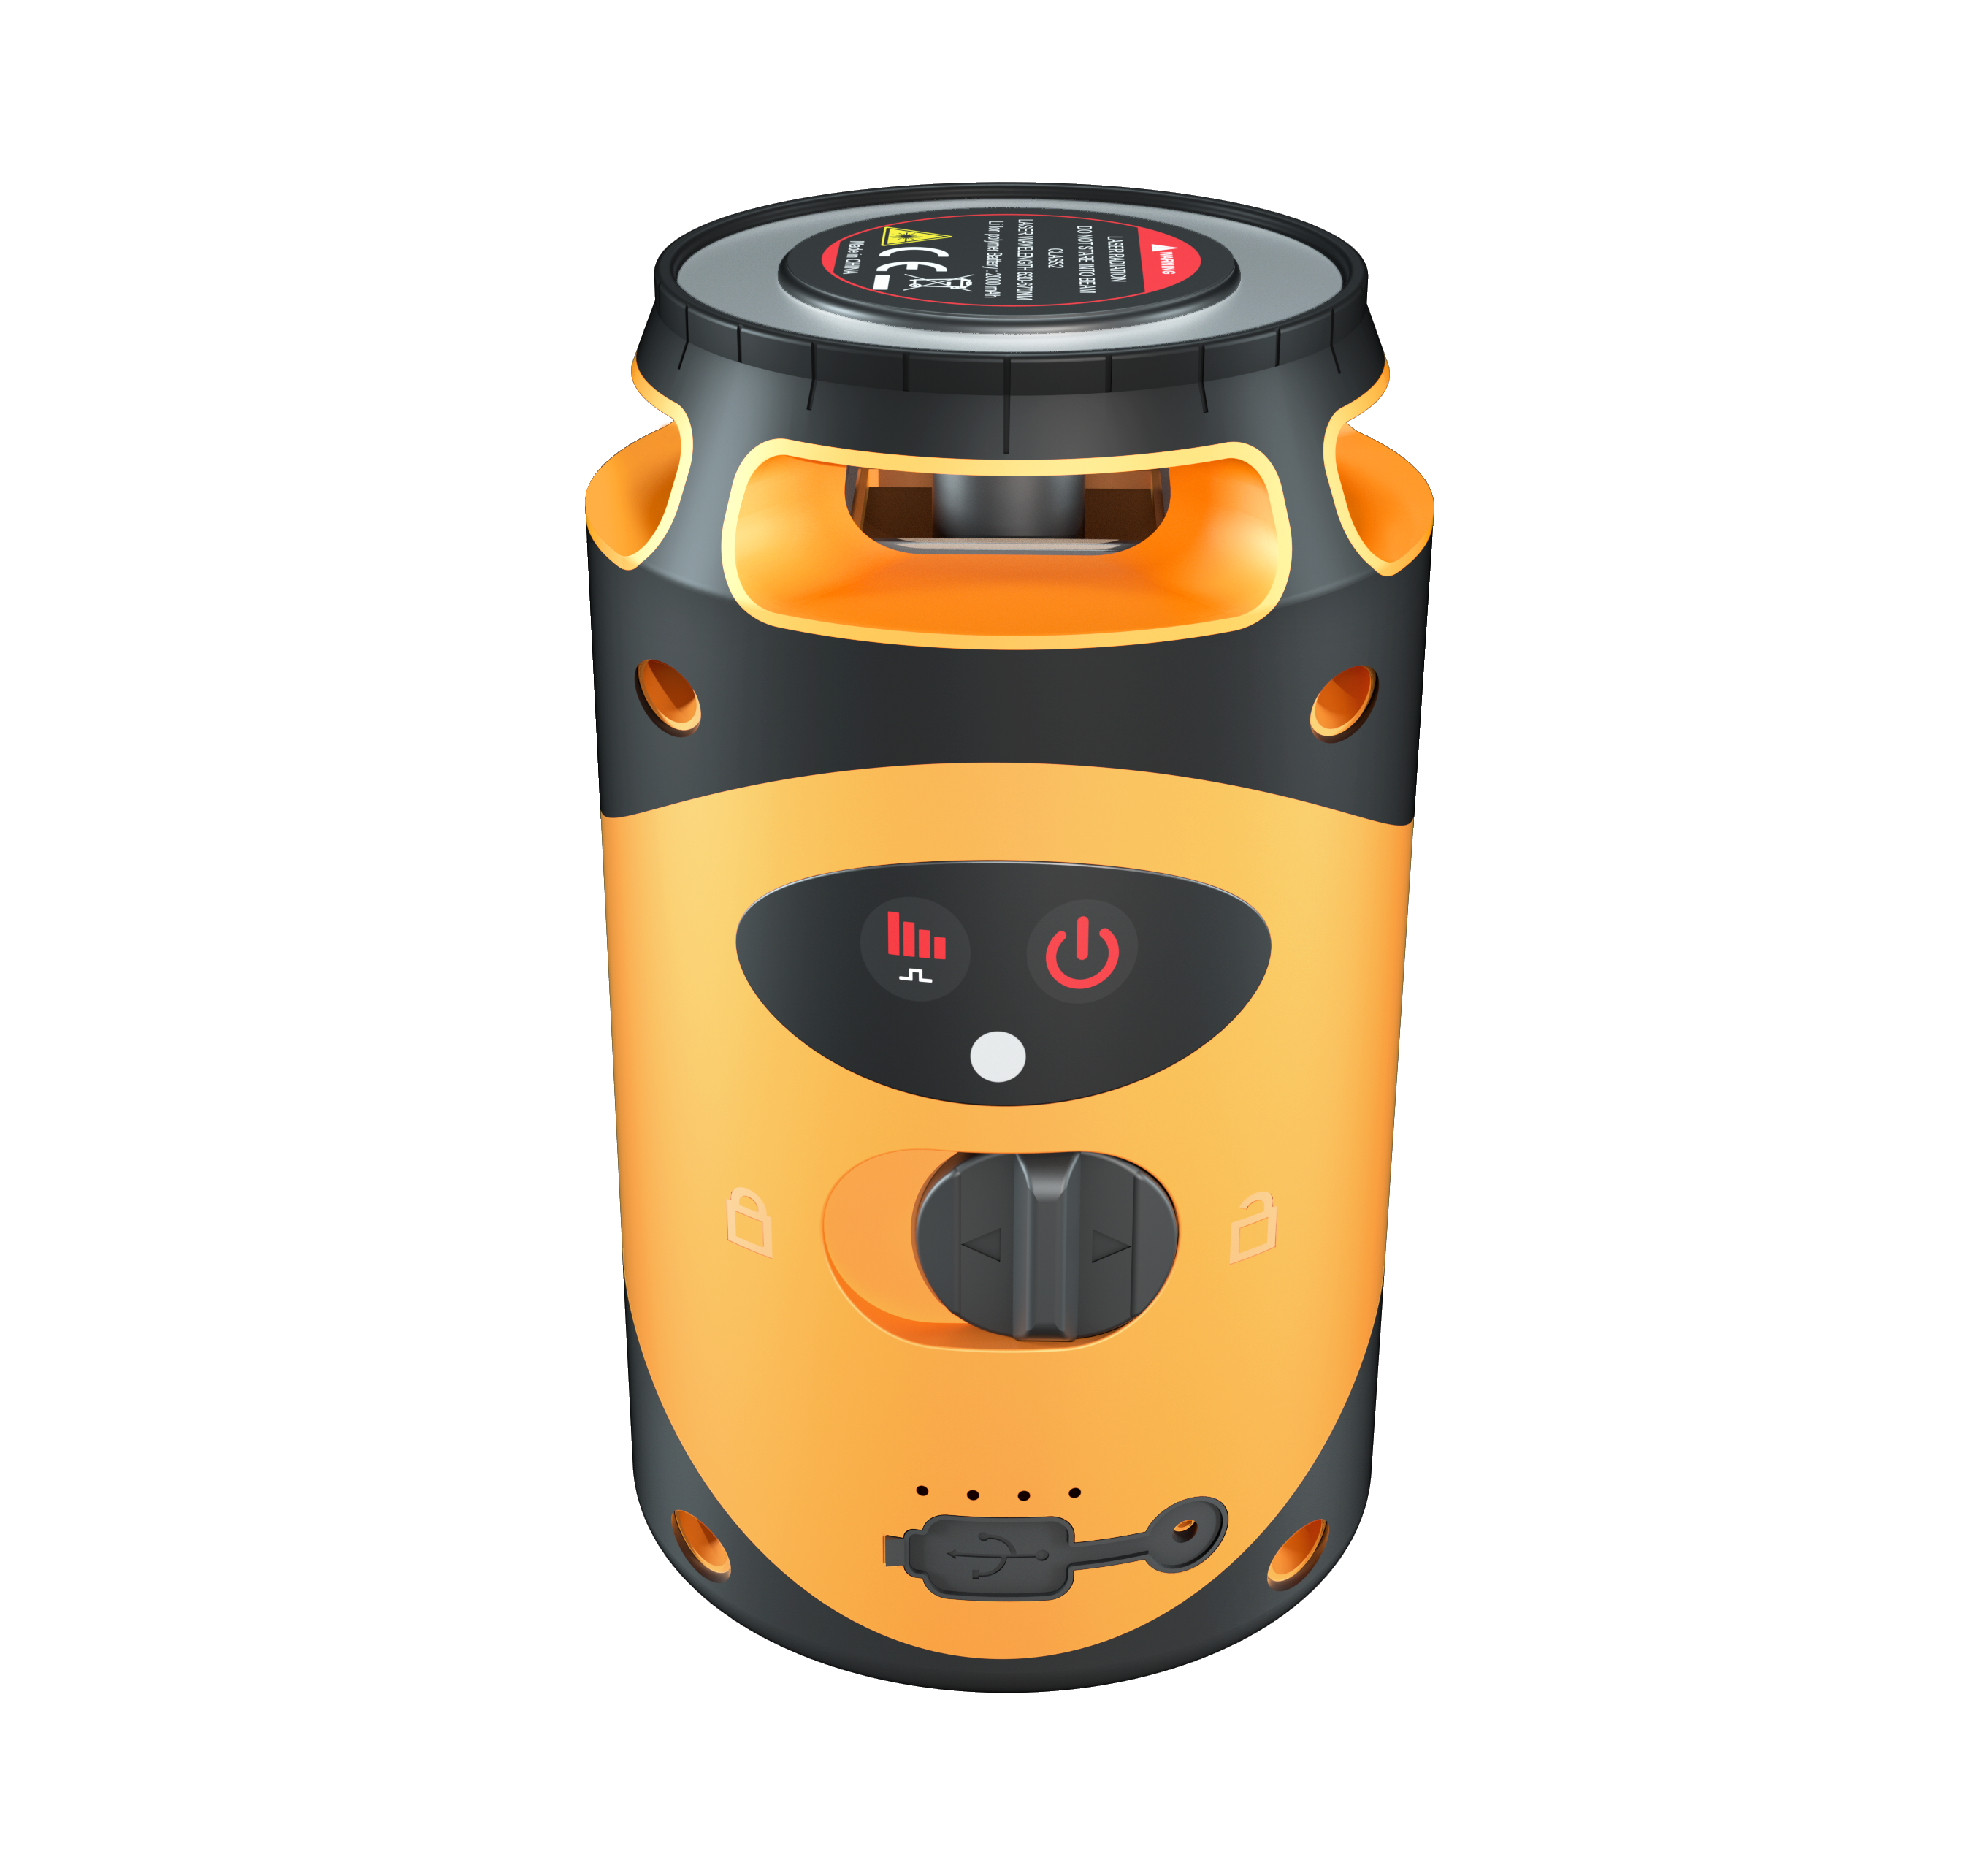 Hiiqually 3D green beam Self-Leveling Laser Level